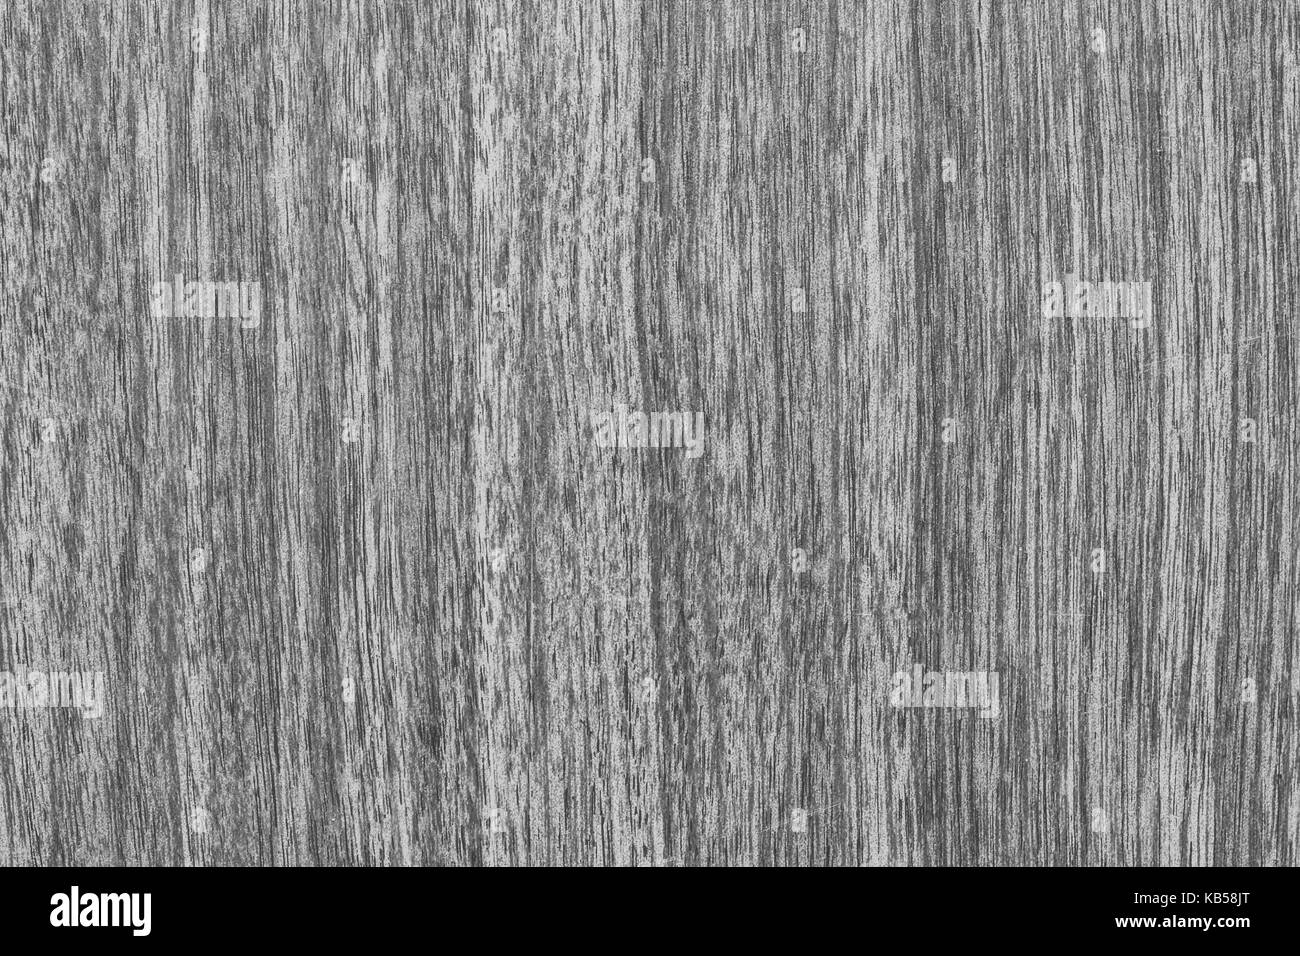 Abstract rustic surface dark wood table texture background. Close up rustic  dark wall made of white wood table planks texture. Rustic dark wood table  Stock Photo - Alamy